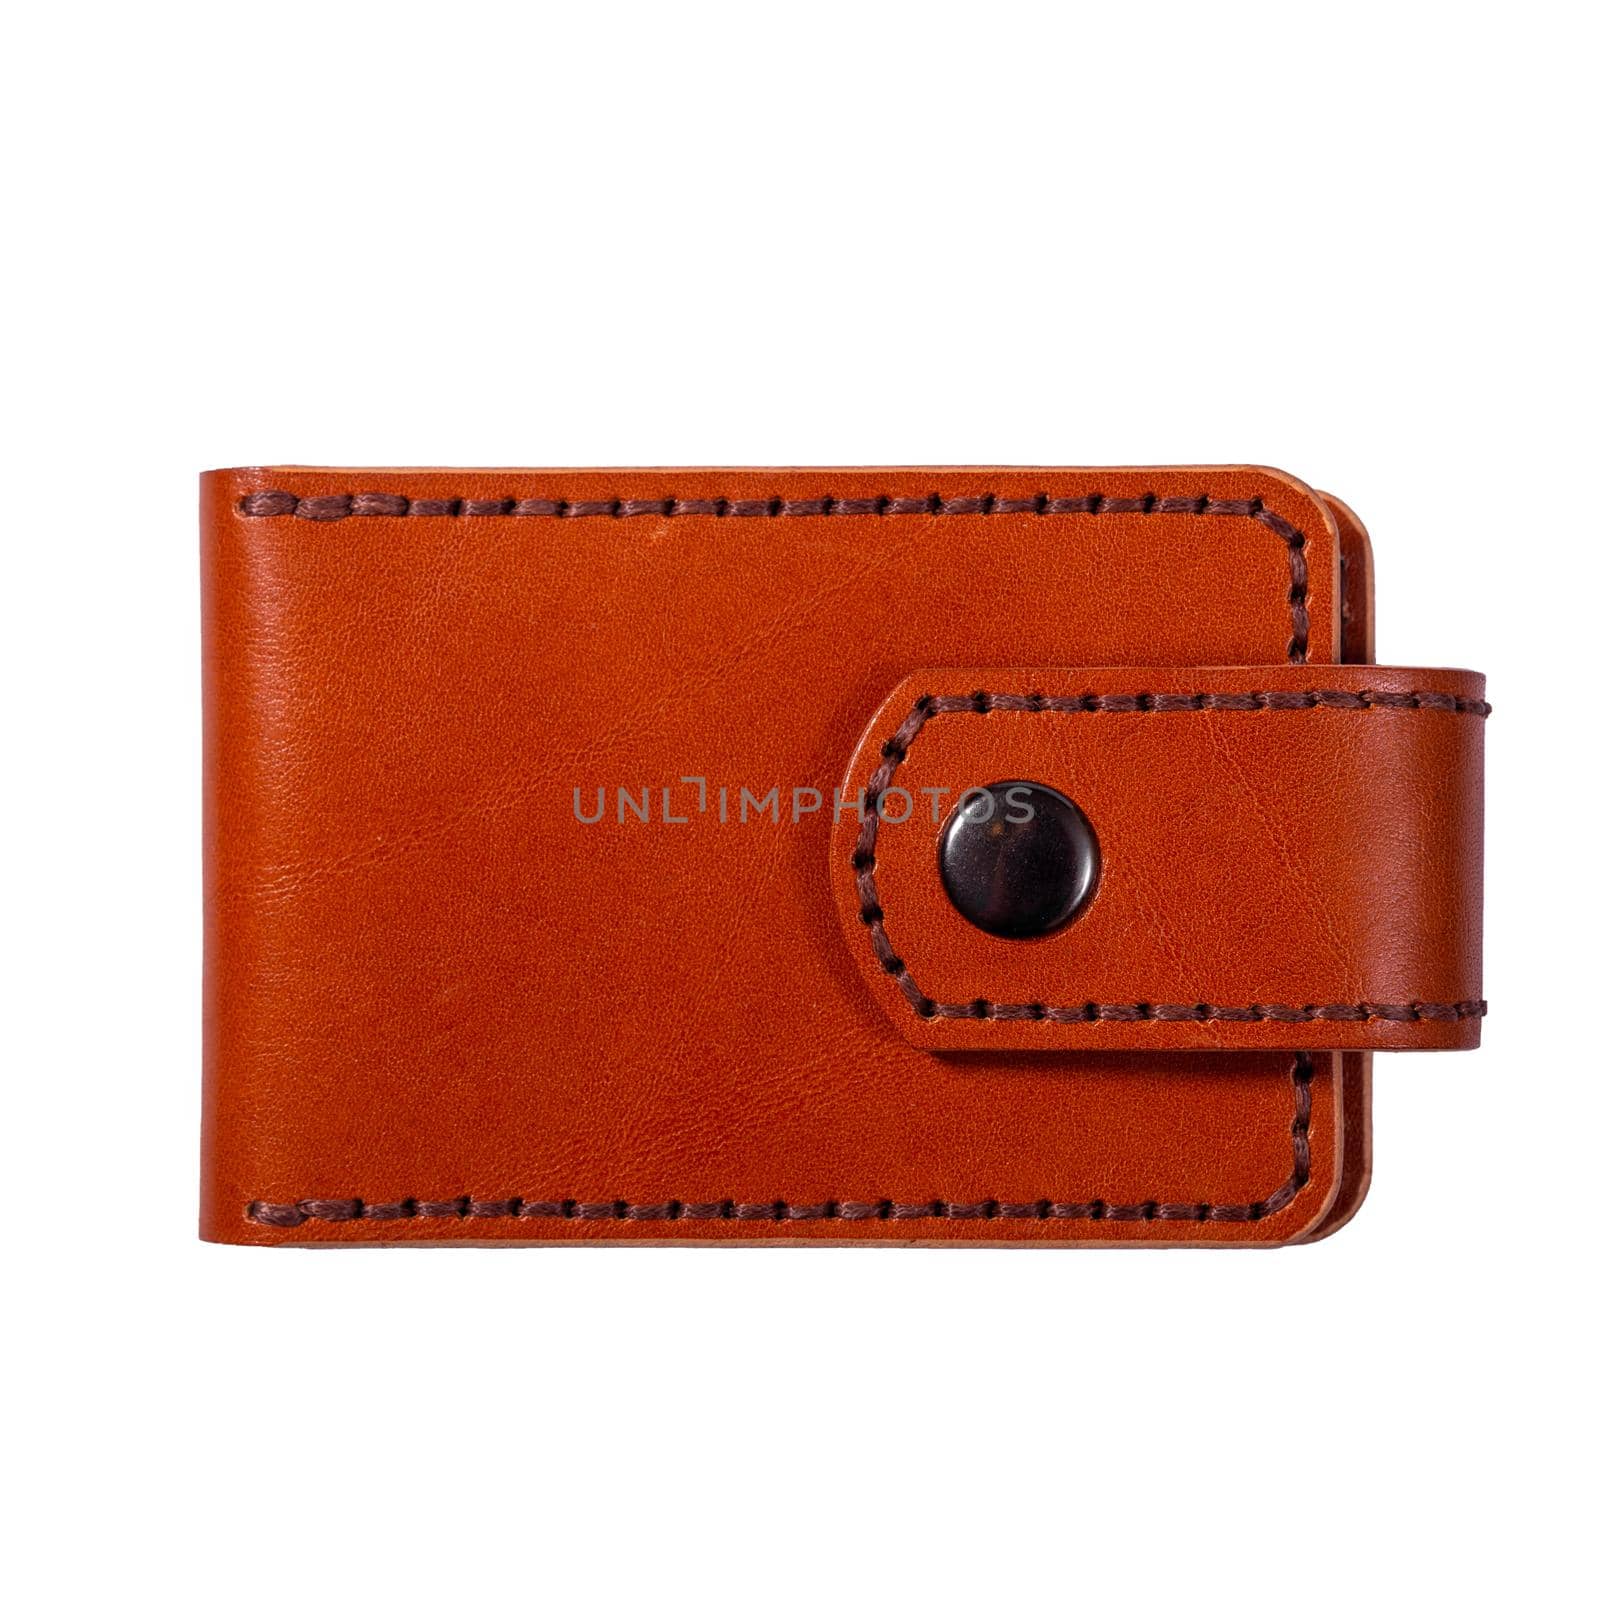 Luxury craft business card holder case made of leather. Brown Leather box for cards isolated on white background.